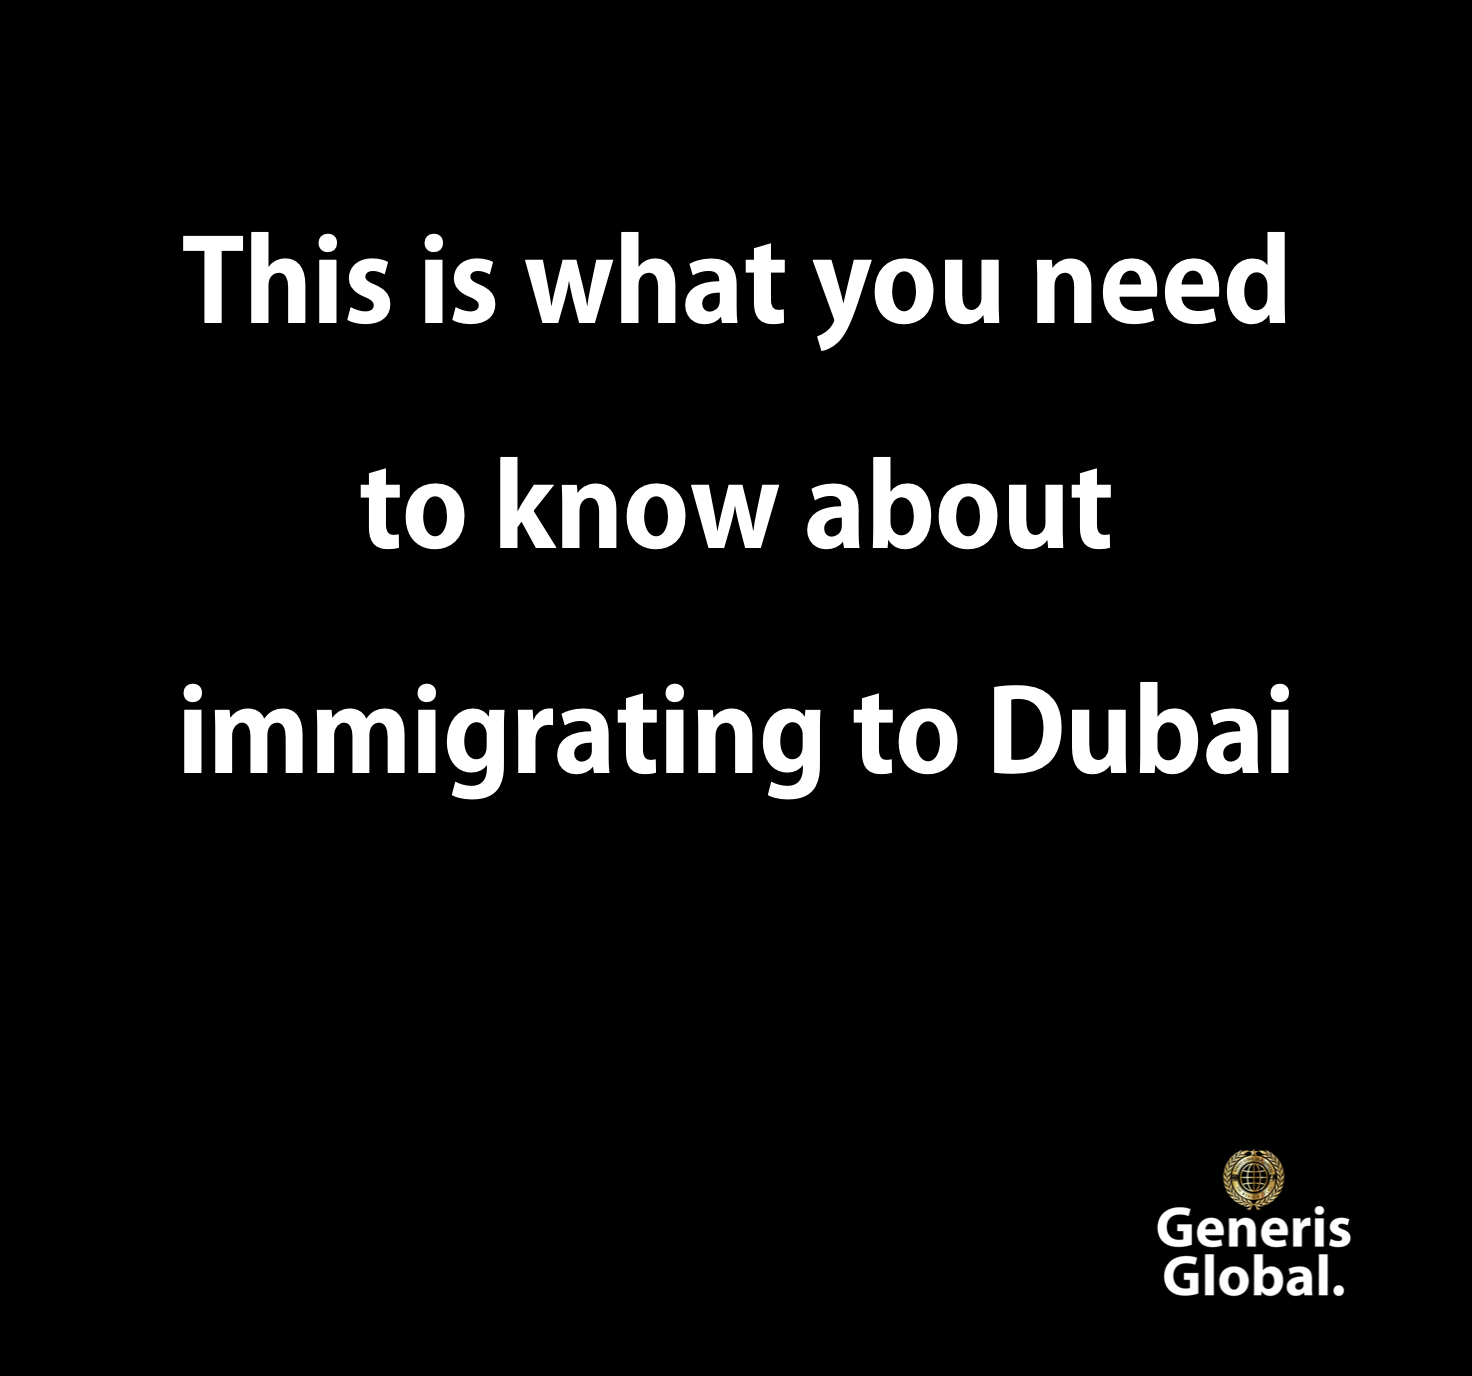 This is what you need to know about immigrating to Dubai